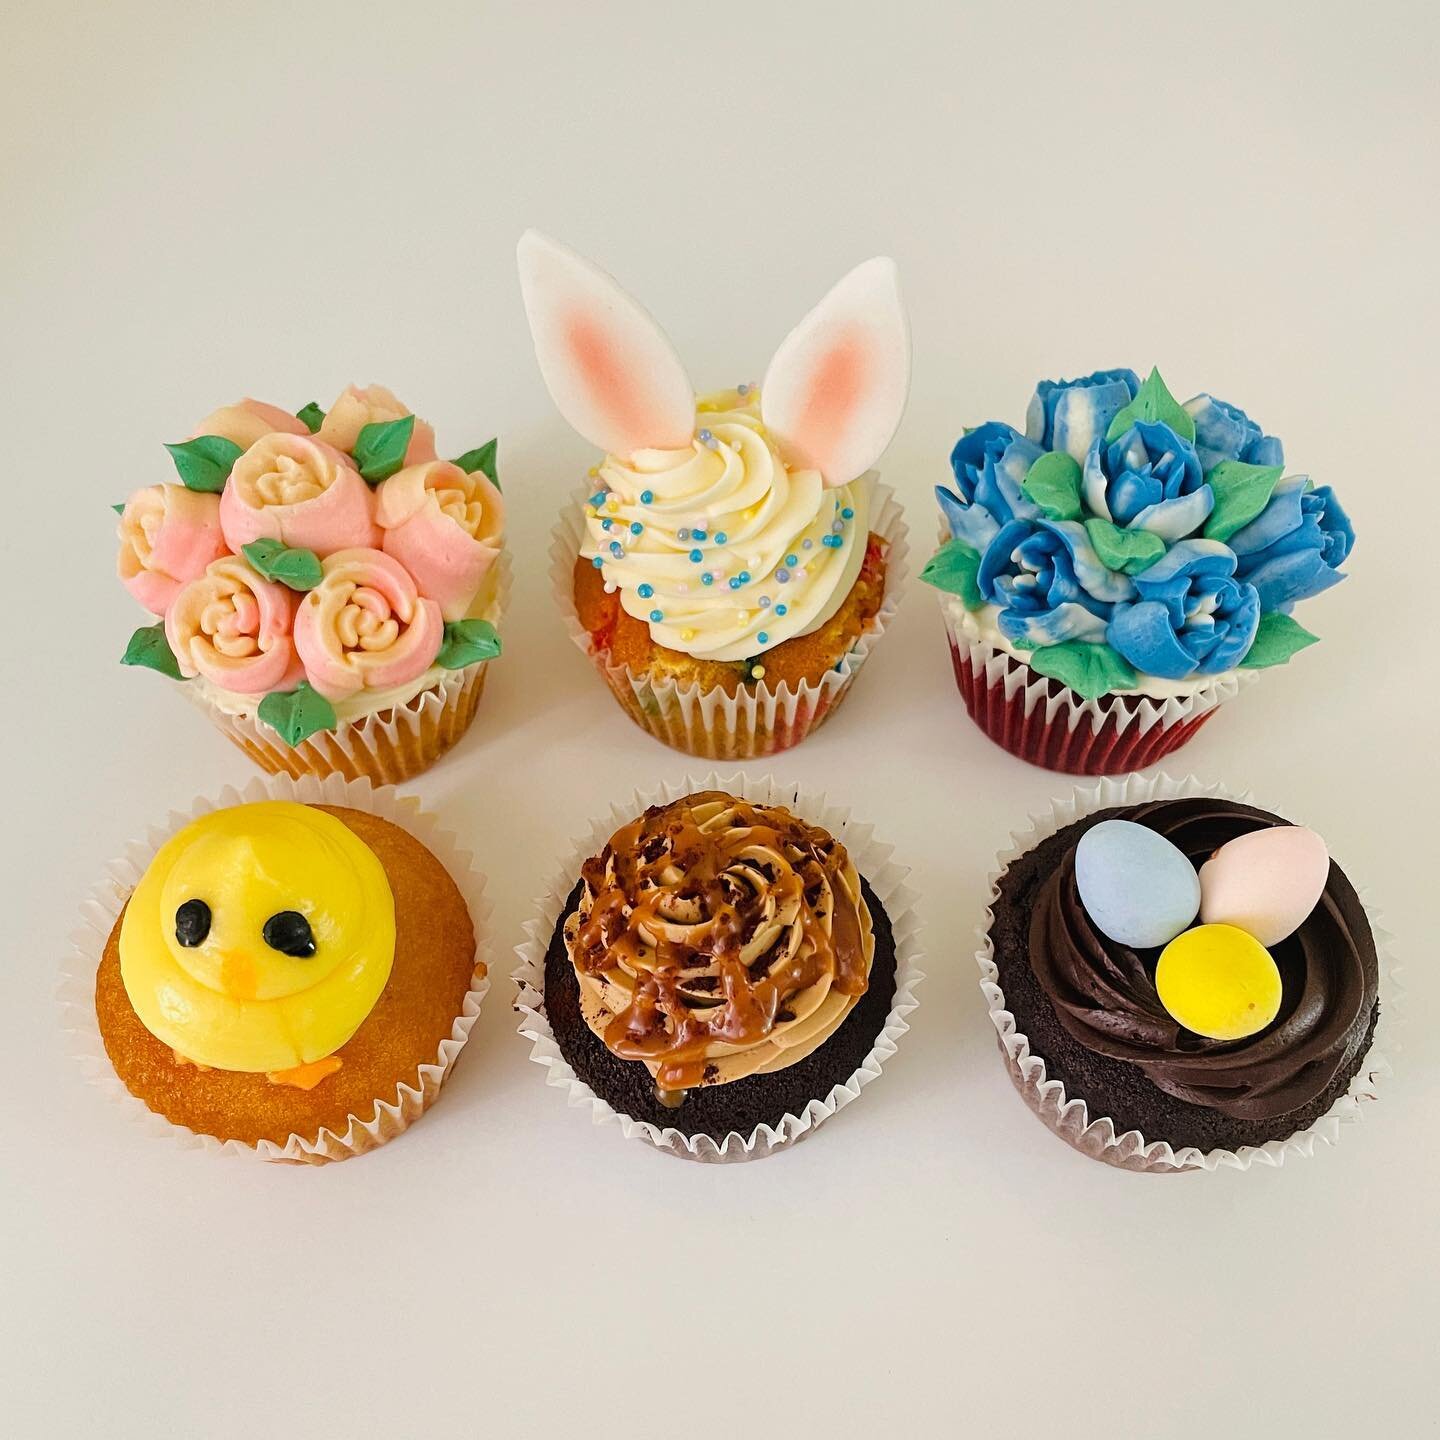 Our Easter menu is now live in our website! Make your Easter celebration sweeter with these cute and tasty treats! Swipe through and don&rsquo;t forget to pre-order. Cut off dates for Easter orders is on April 5 at 2pm. We offer local delivery and pi